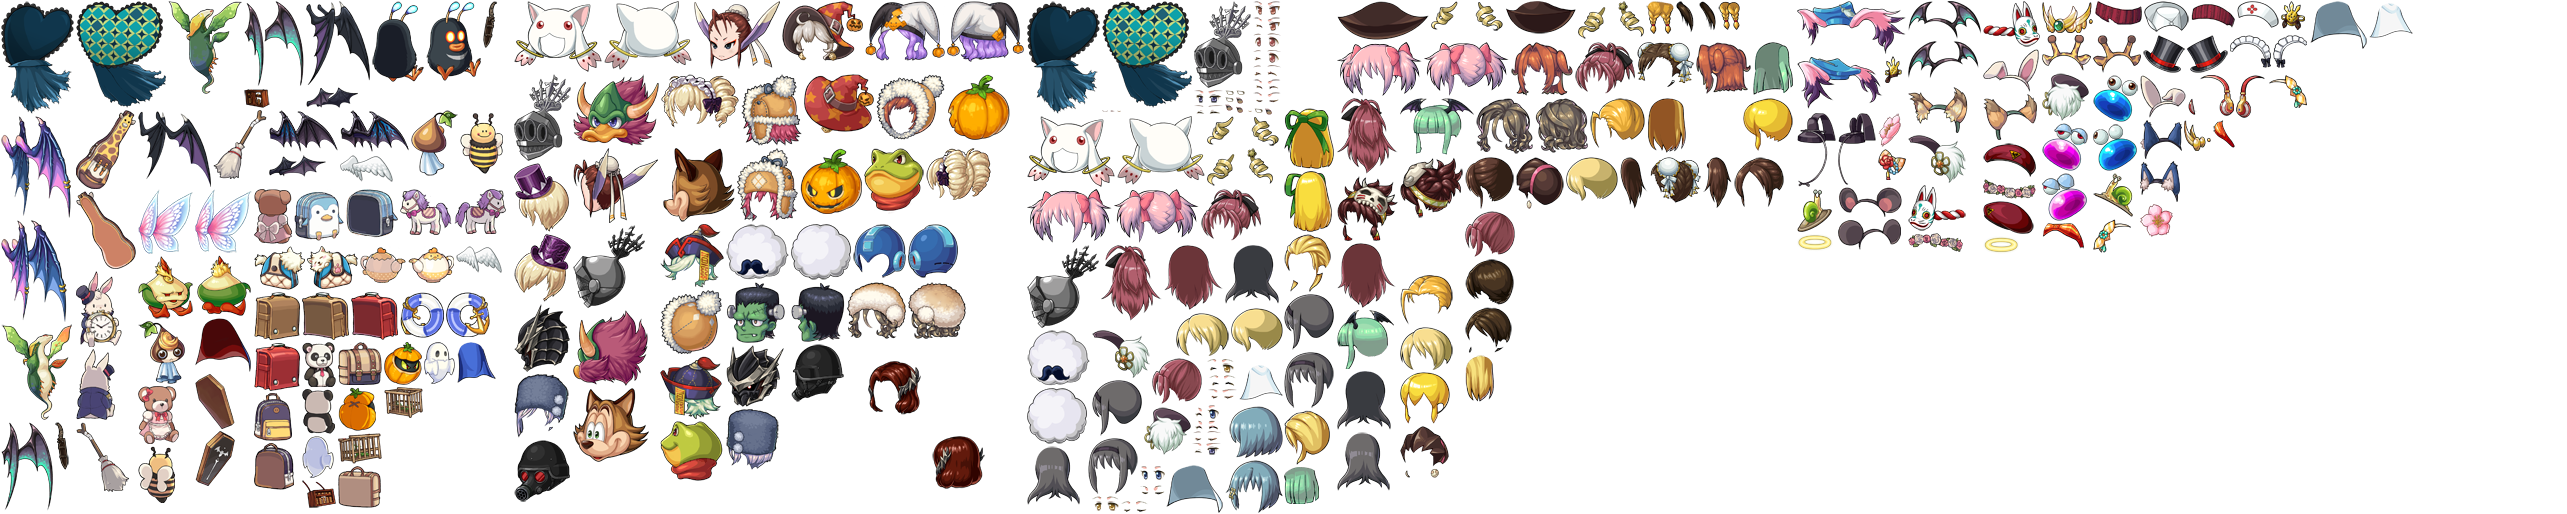 Breath of Fire 6 - Collaborations Hats